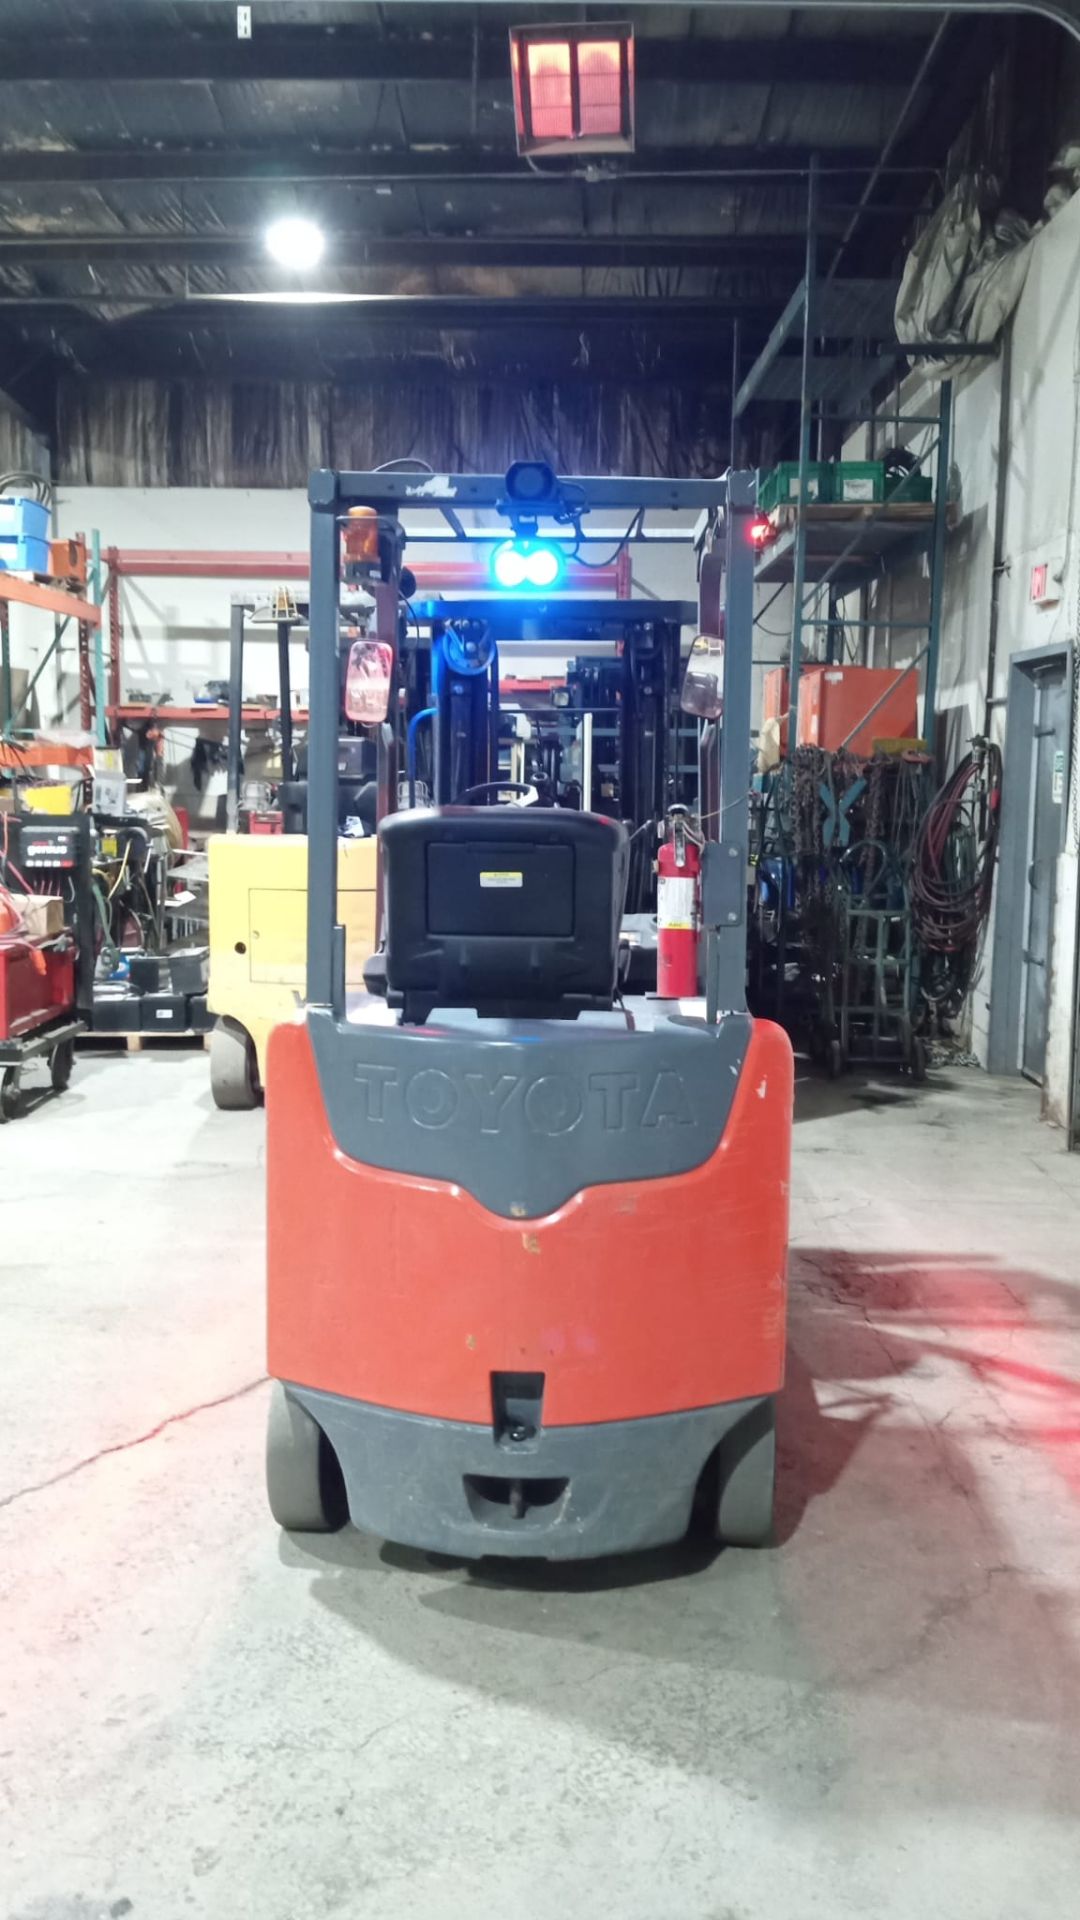 2014 TOYOTA 5,000lbs Capacity Electric Forklift 36V with sideshift & 3-Stage Mast - FREE CUSTOMS - Image 5 of 6